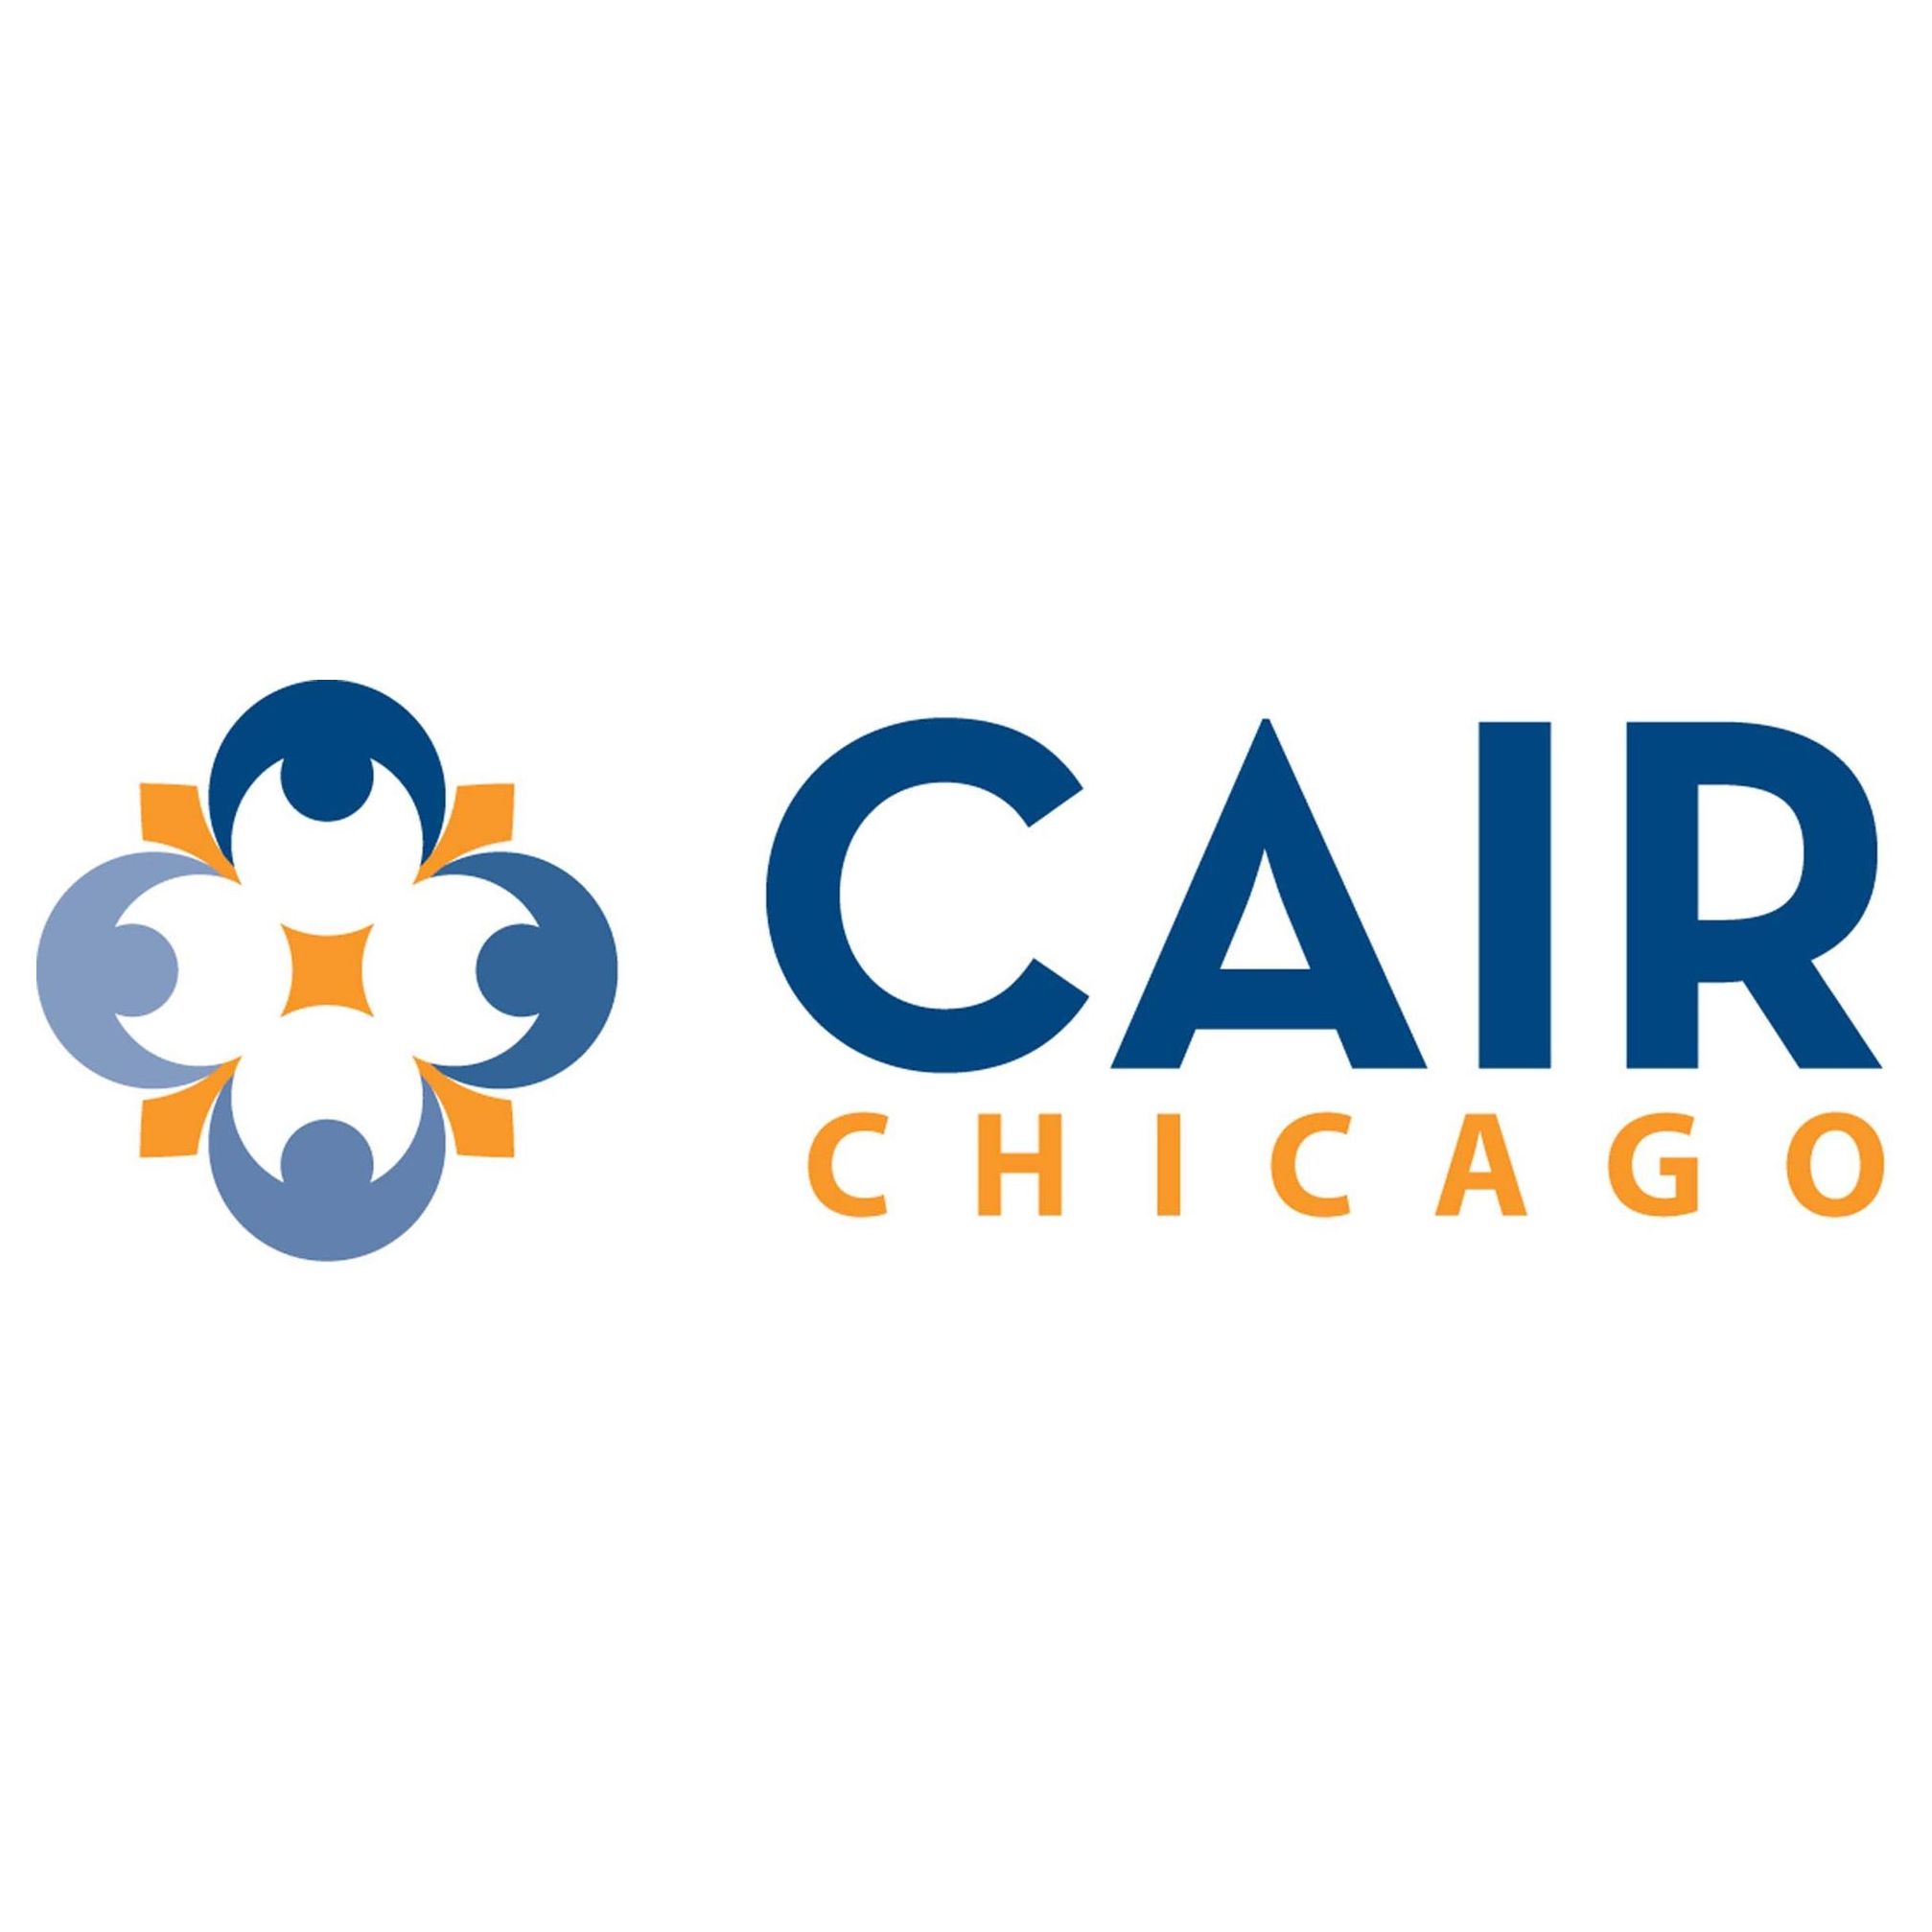 Muslim Organization in Illinois - Council on American-Islamic Relations Chicago